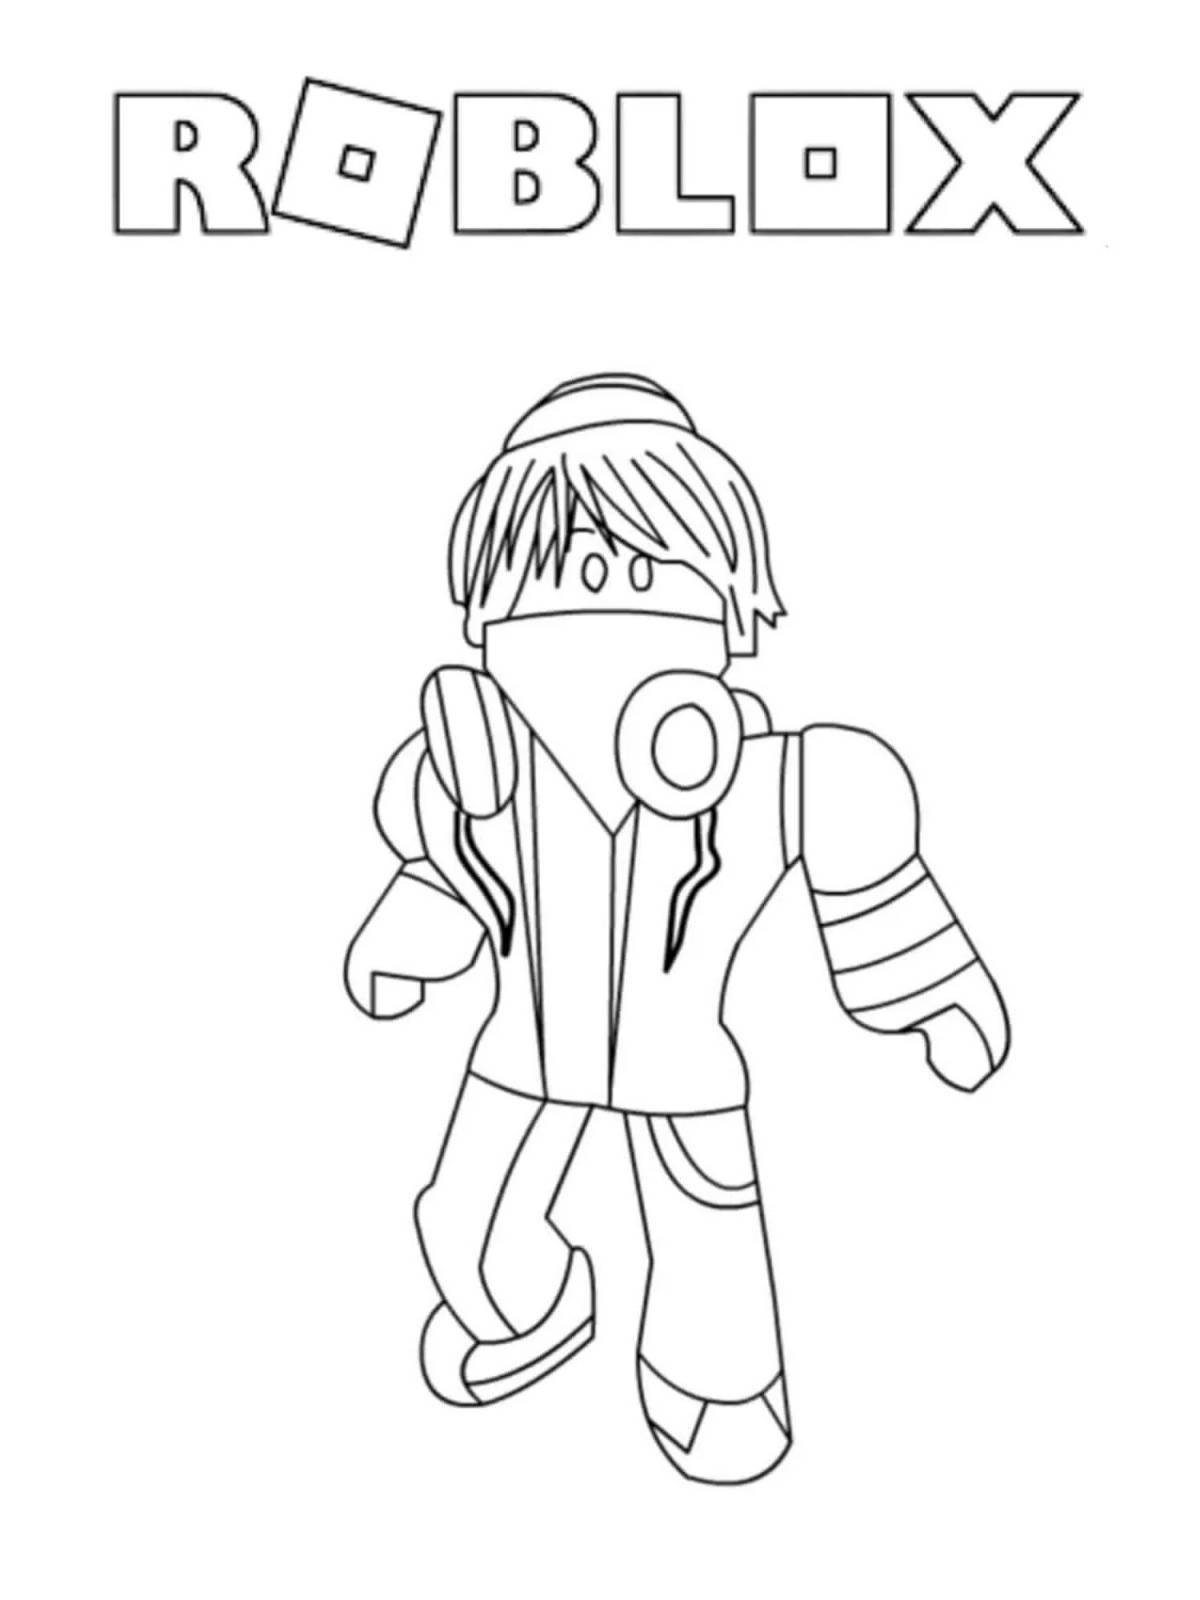 Exciting roblox character coloring pages